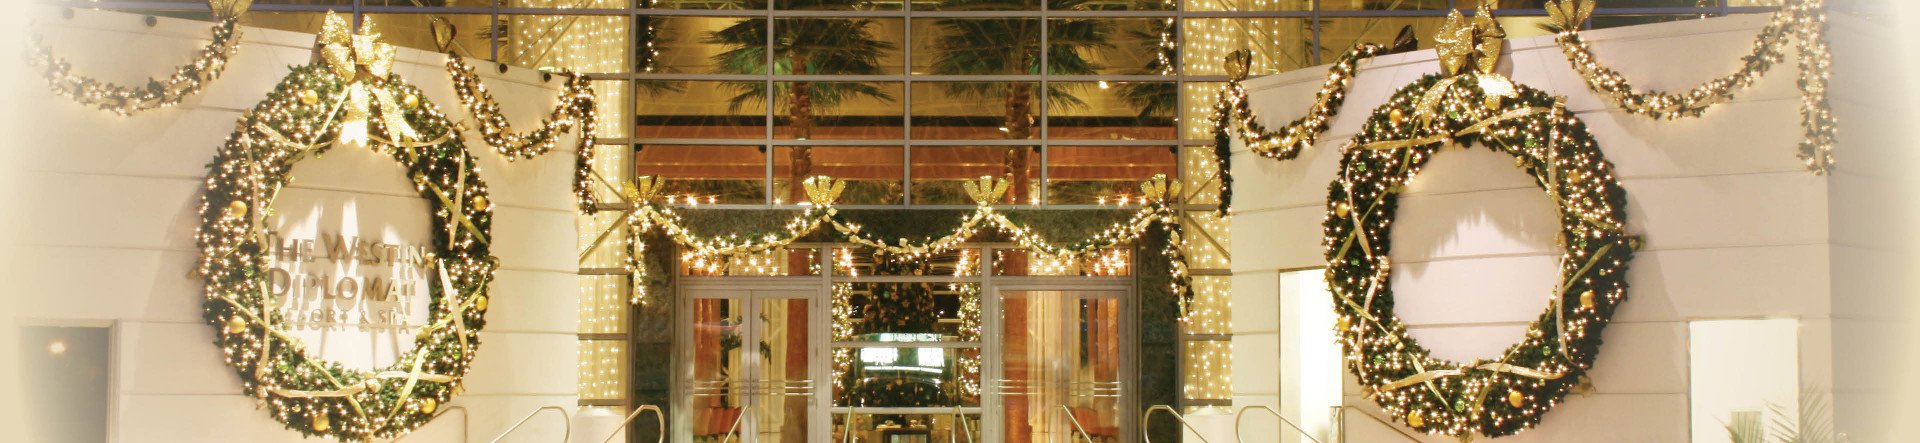 Westin Diplomat with large wreaths and lights